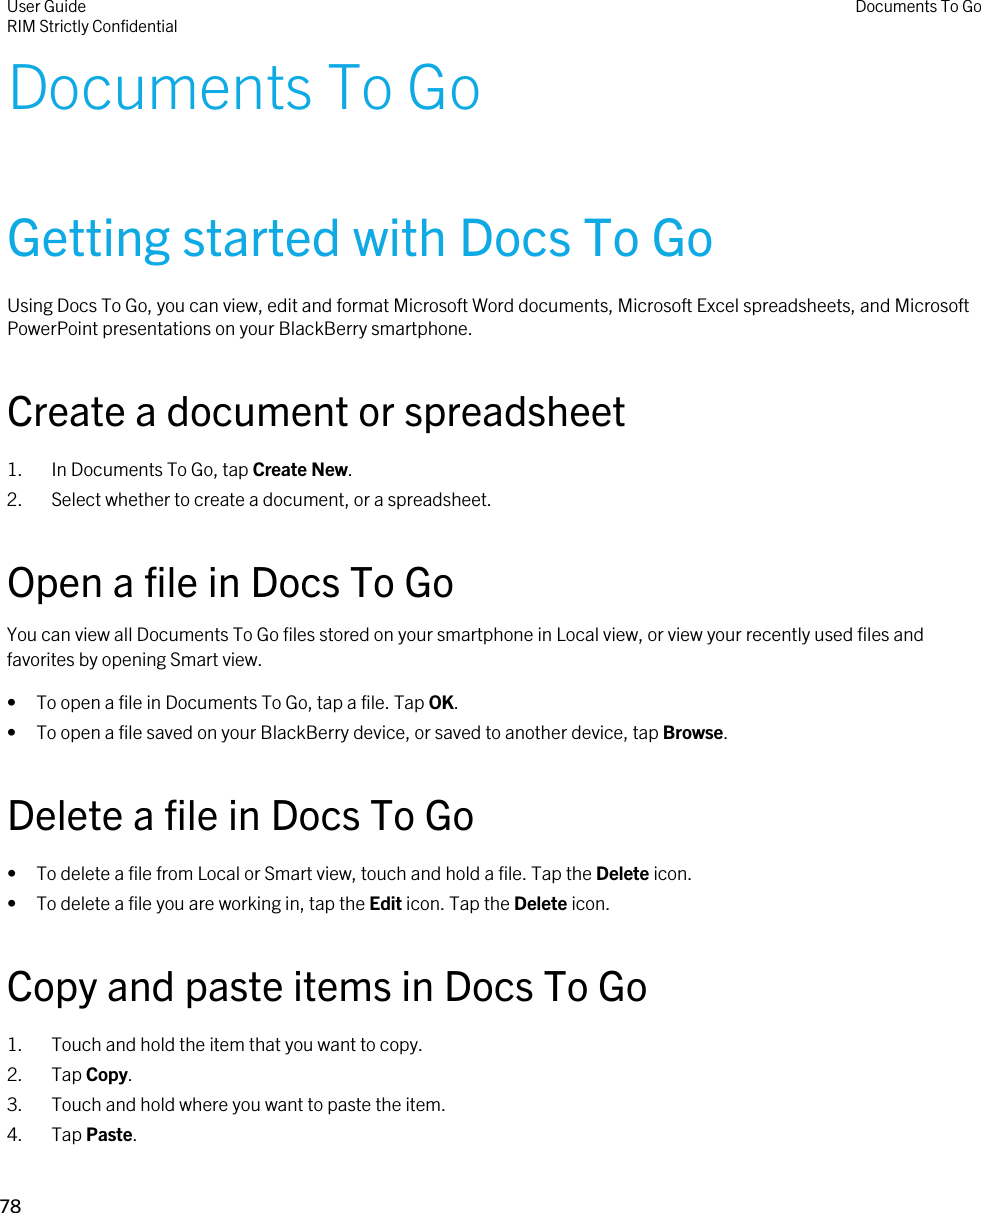 Documents To GoGetting started with Docs To GoUsing Docs To Go, you can view, edit and format Microsoft Word documents, Microsoft Excel spreadsheets, and Microsoft PowerPoint presentations on your BlackBerry smartphone.Create a document or spreadsheet1. In Documents To Go, tap Create New.2. Select whether to create a document, or a spreadsheet.Open a file in Docs To GoYou can view all Documents To Go files stored on your smartphone in Local view, or view your recently used files and favorites by opening Smart view.• To open a file in Documents To Go, tap a file. Tap OK.• To open a file saved on your BlackBerry device, or saved to another device, tap Browse.Delete a file in Docs To Go• To delete a file from Local or Smart view, touch and hold a file. Tap the Delete icon.• To delete a file you are working in, tap the Edit icon. Tap the Delete icon.Copy and paste items in Docs To Go1. Touch and hold the item that you want to copy.2. Tap Copy.3. Touch and hold where you want to paste the item.4. Tap Paste.User GuideRIM Strictly Confidential Documents To Go78 